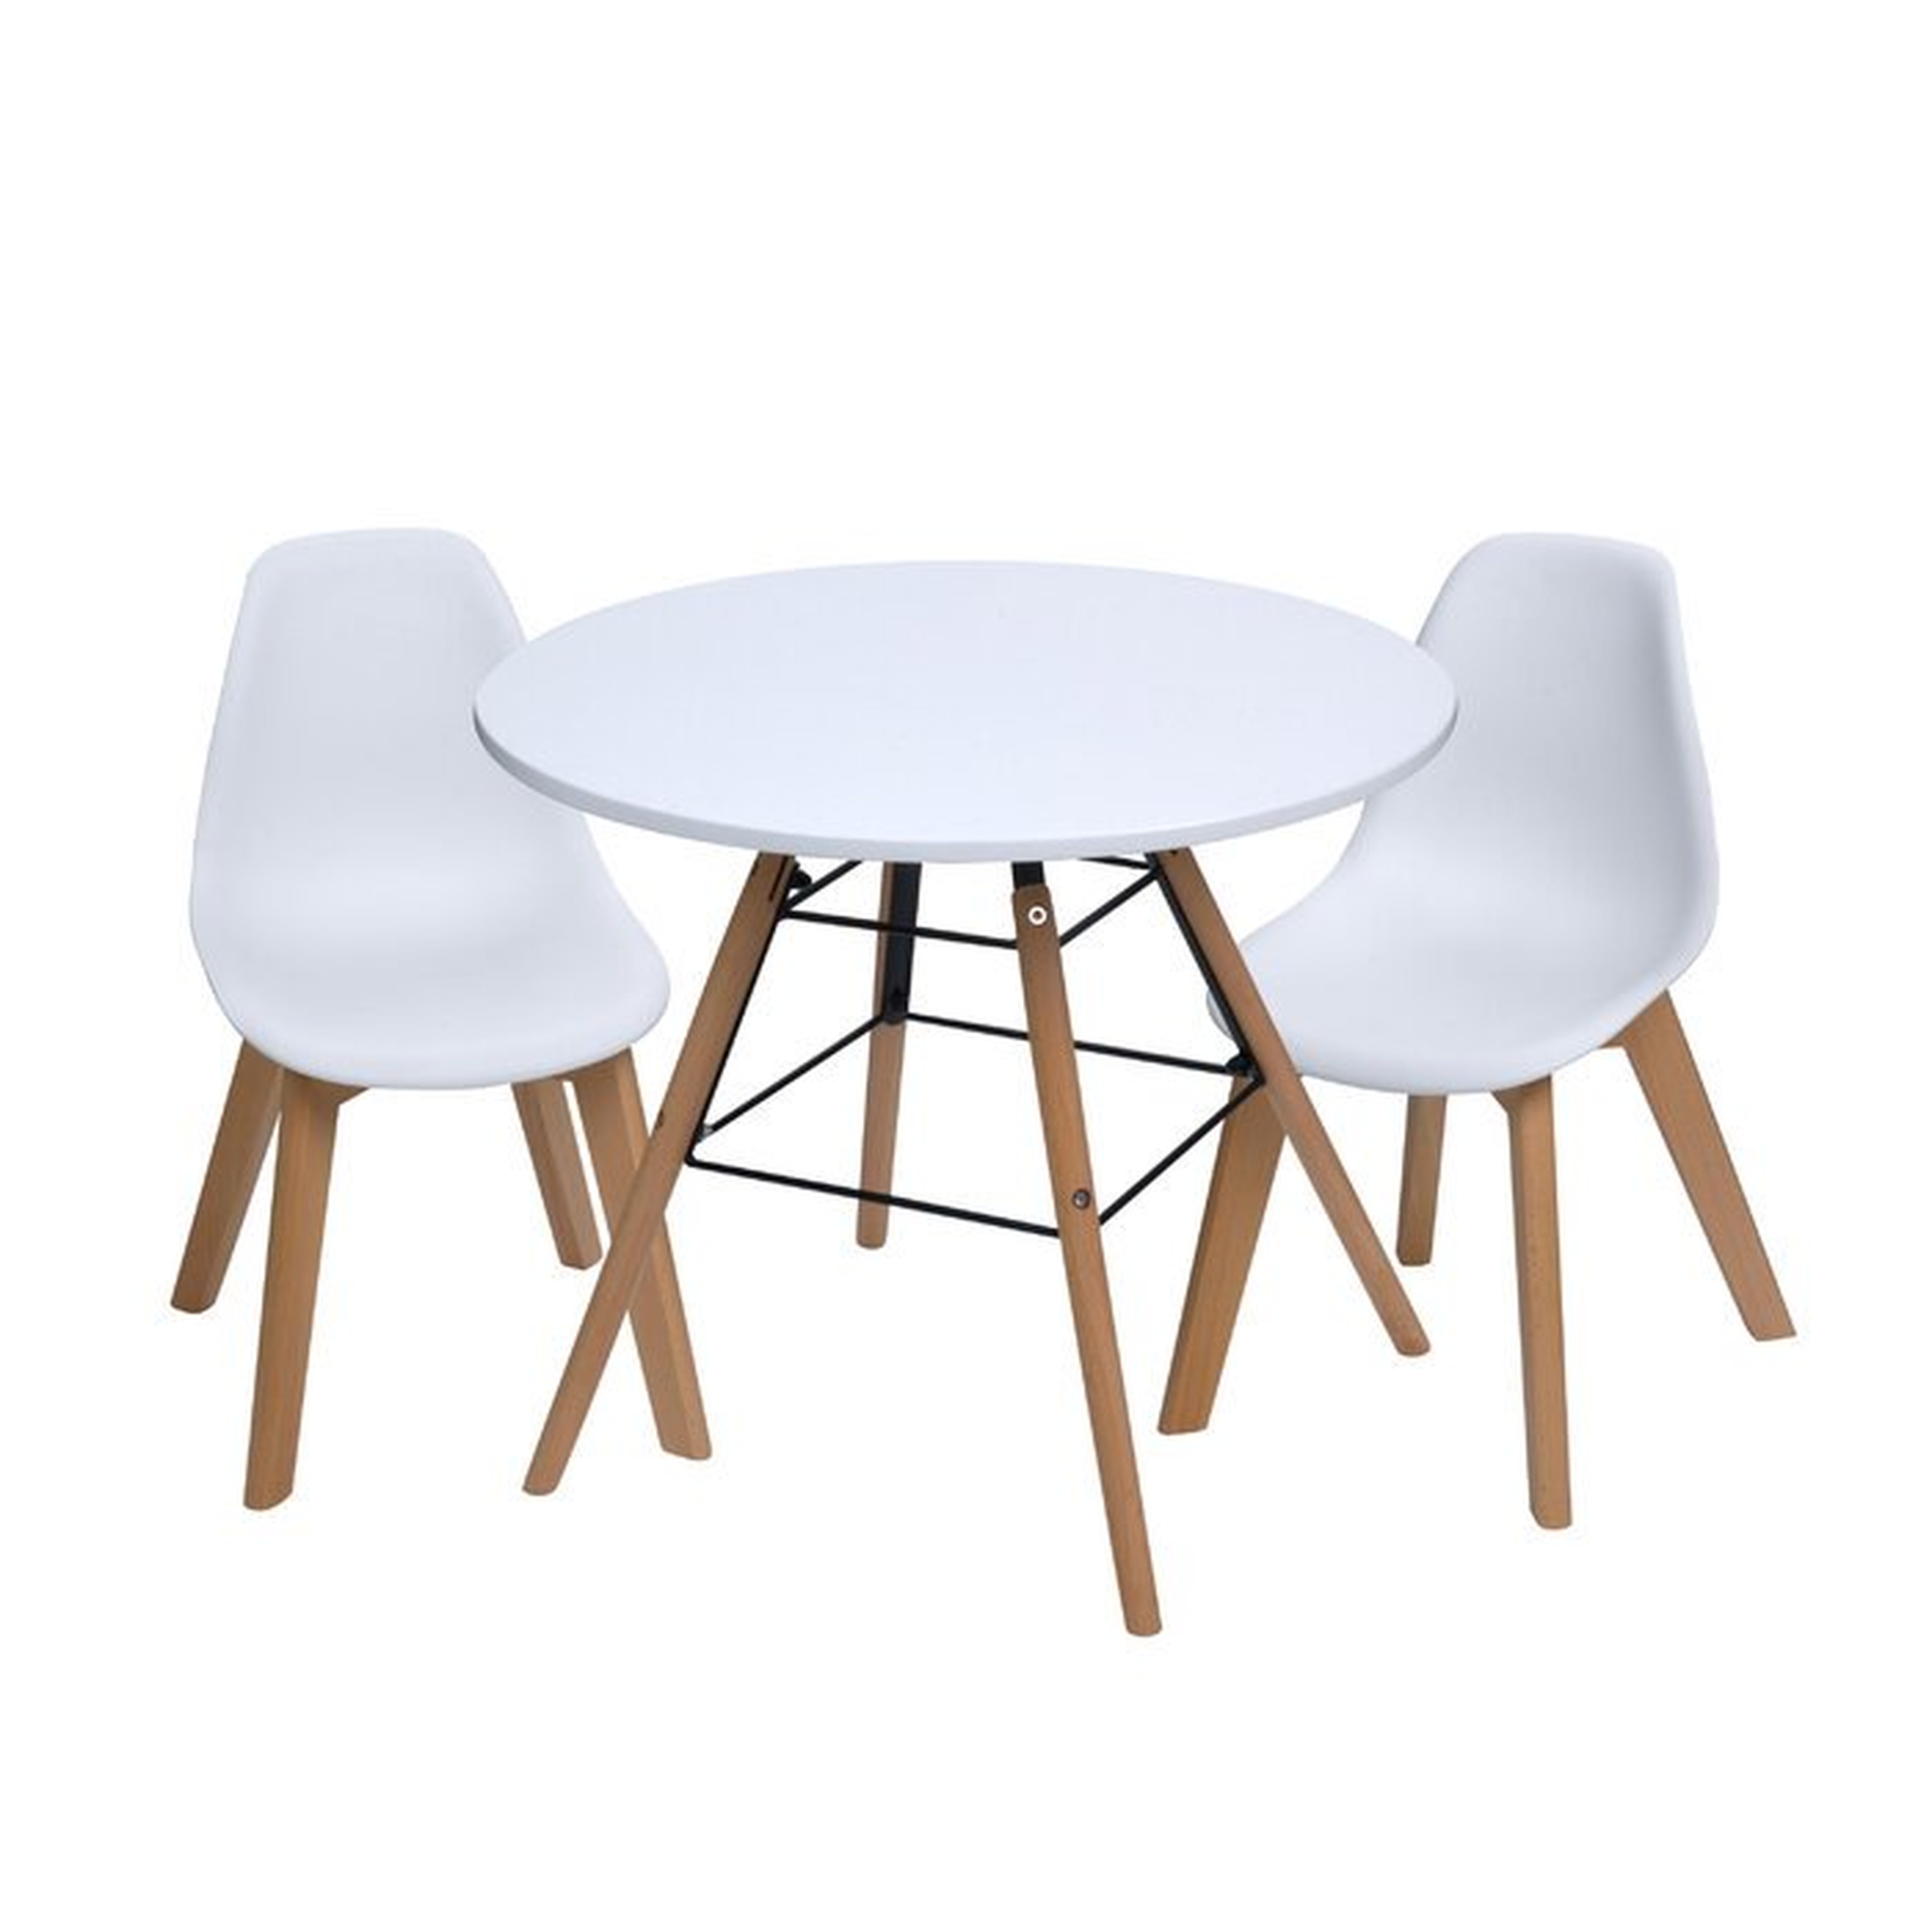 Letendre Kids 3 Piece Round Table and Chair Set - Wayfair